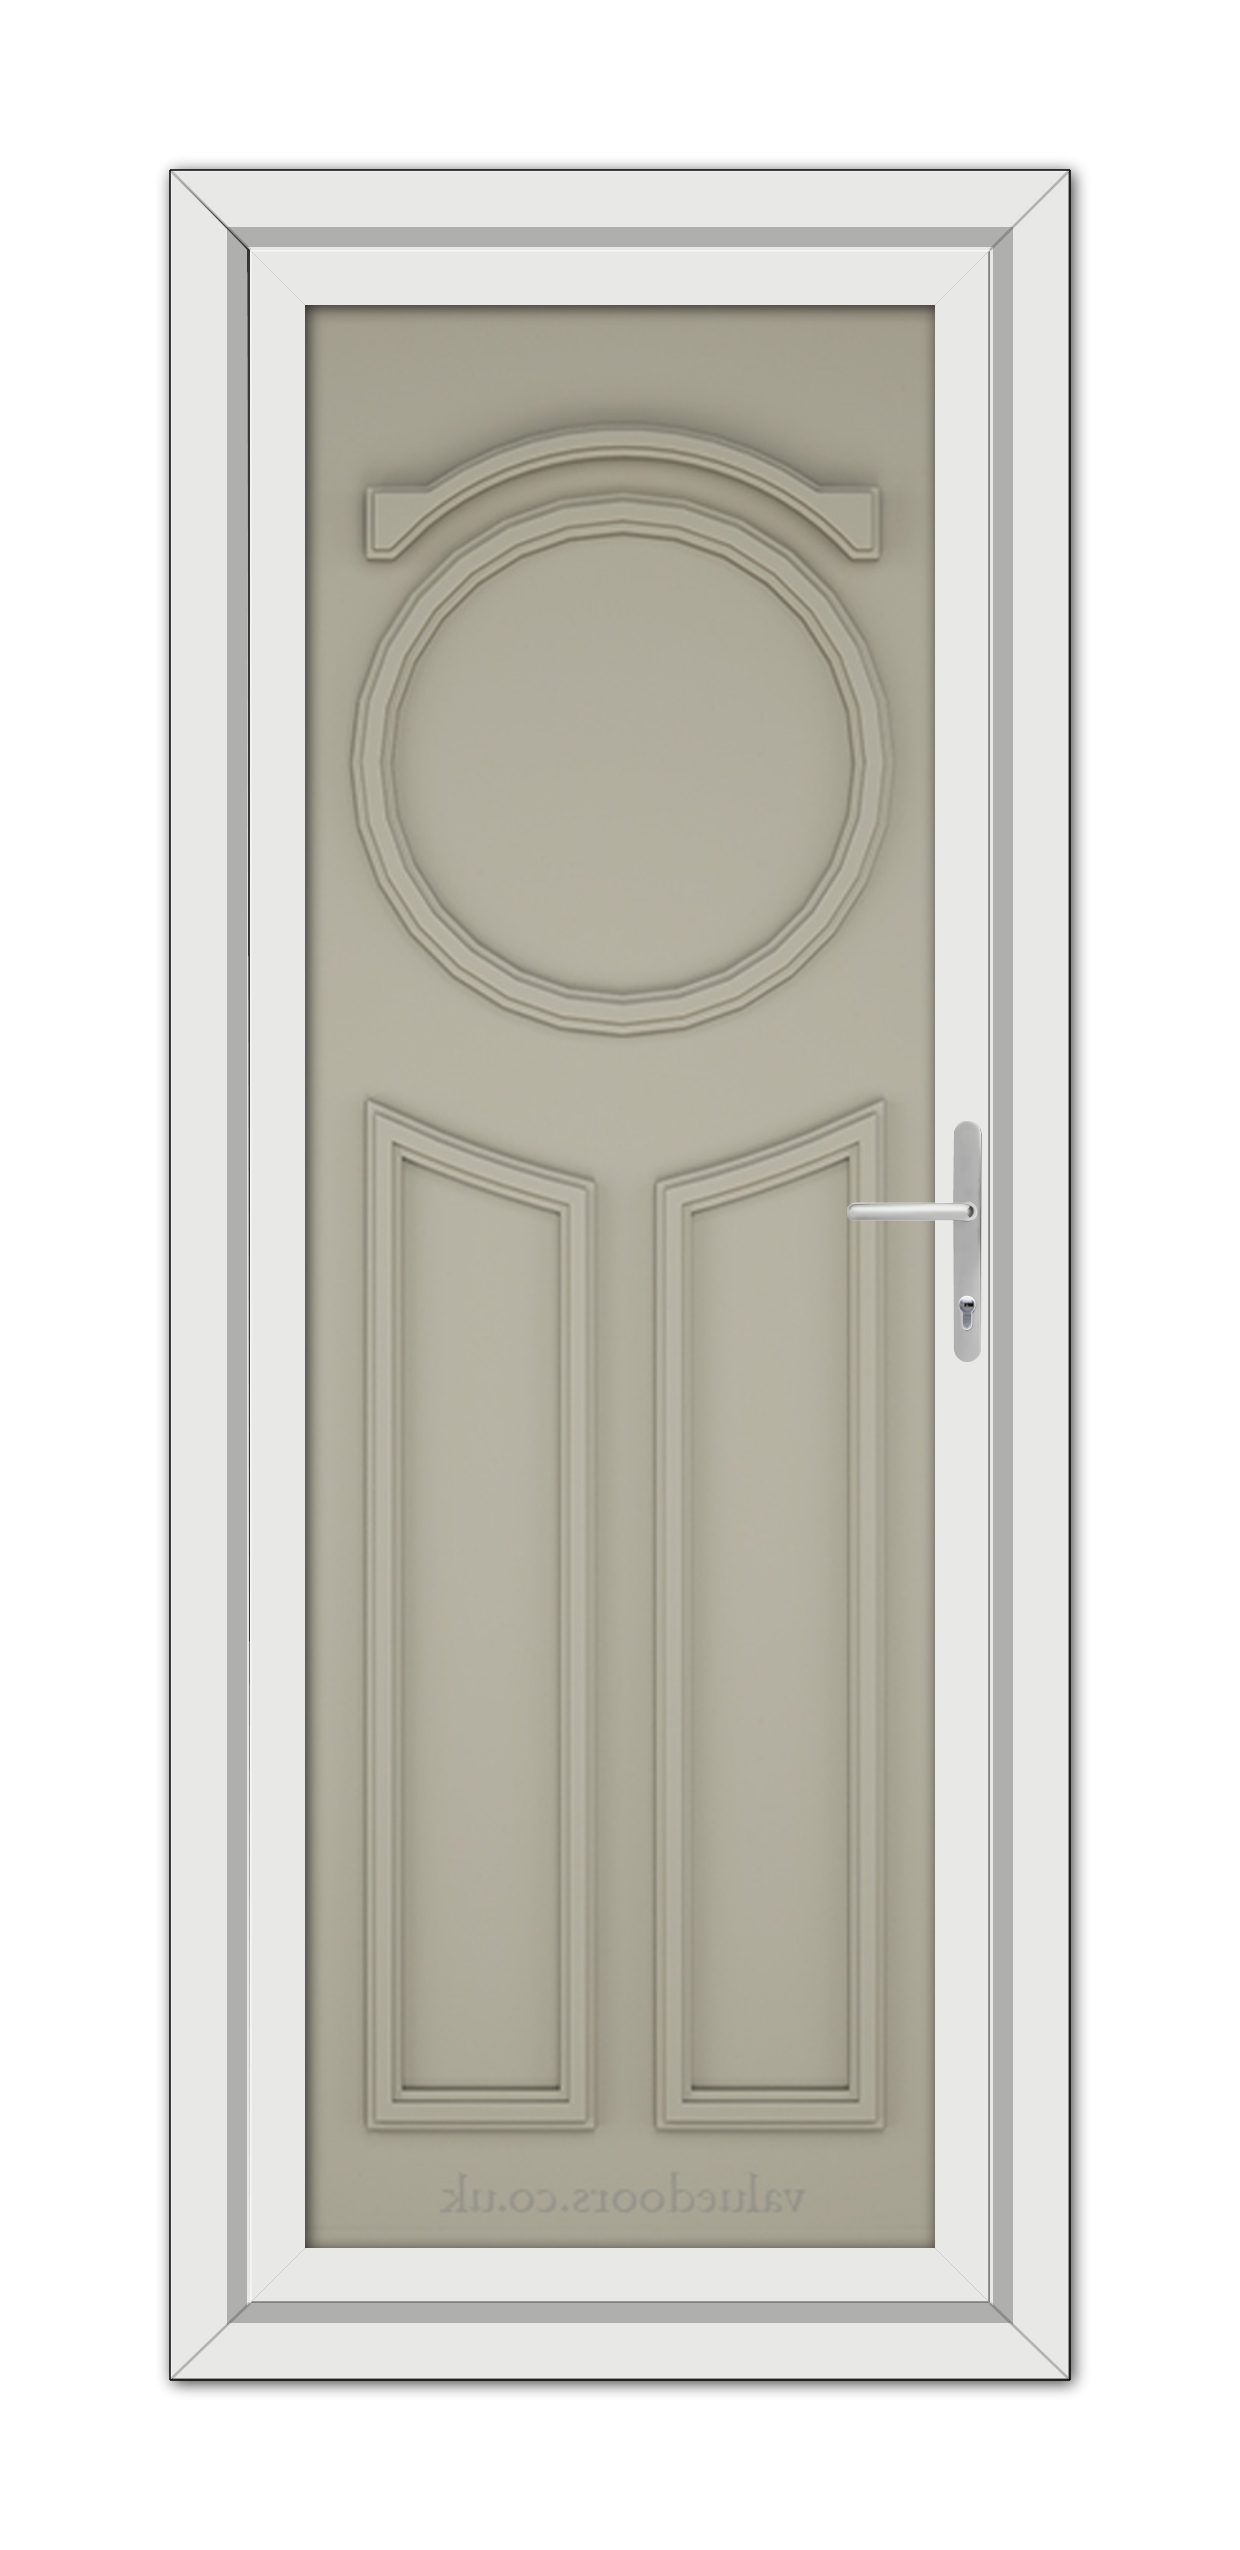 A vertical image of a closed Pebble Grey Blenheim Solid uPVC door with a circular window at the top and a silver handle on the right side, set within a white frame.